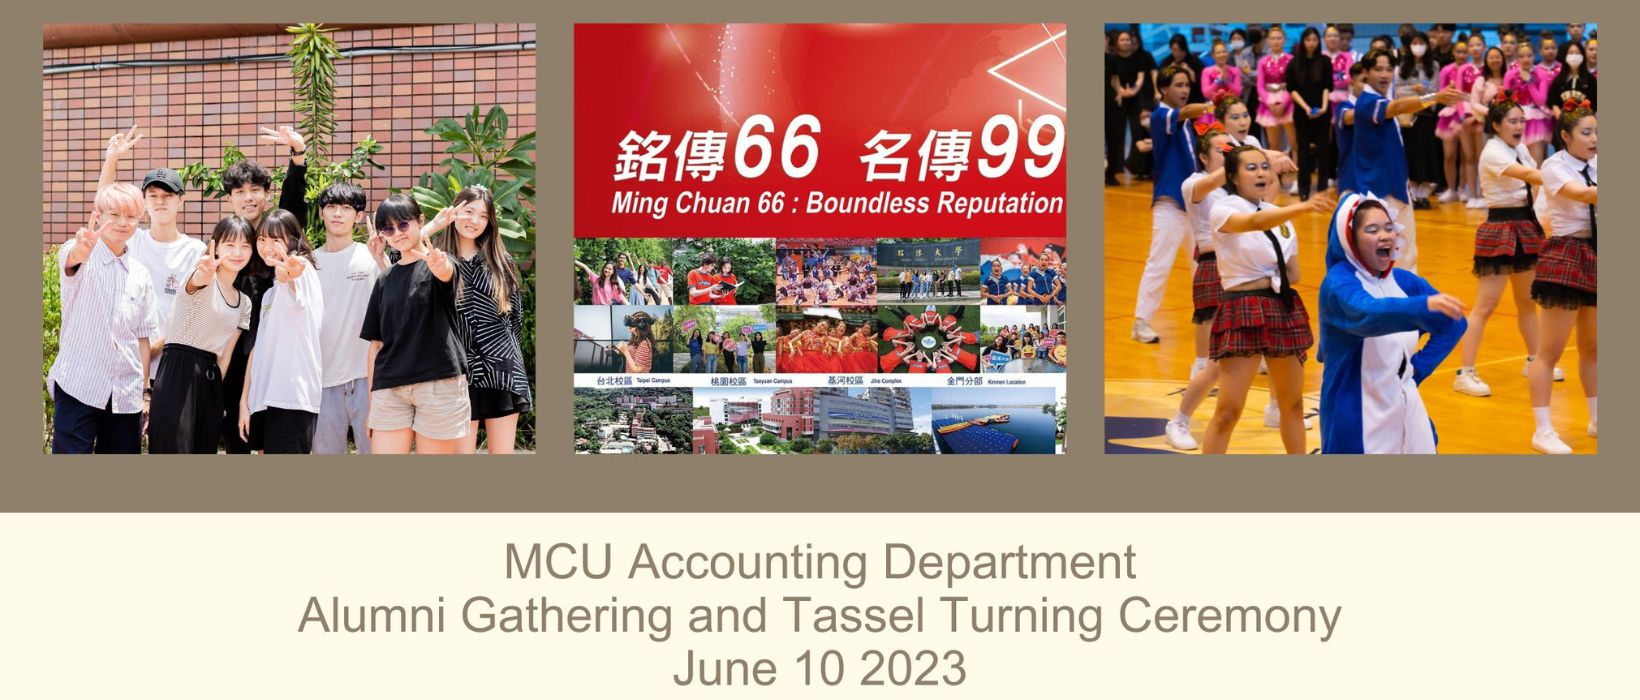 Featured image for “Alumni Gathering and Tassel Turning Ceremony of 111 School Year, Department of Accounting , MCU”